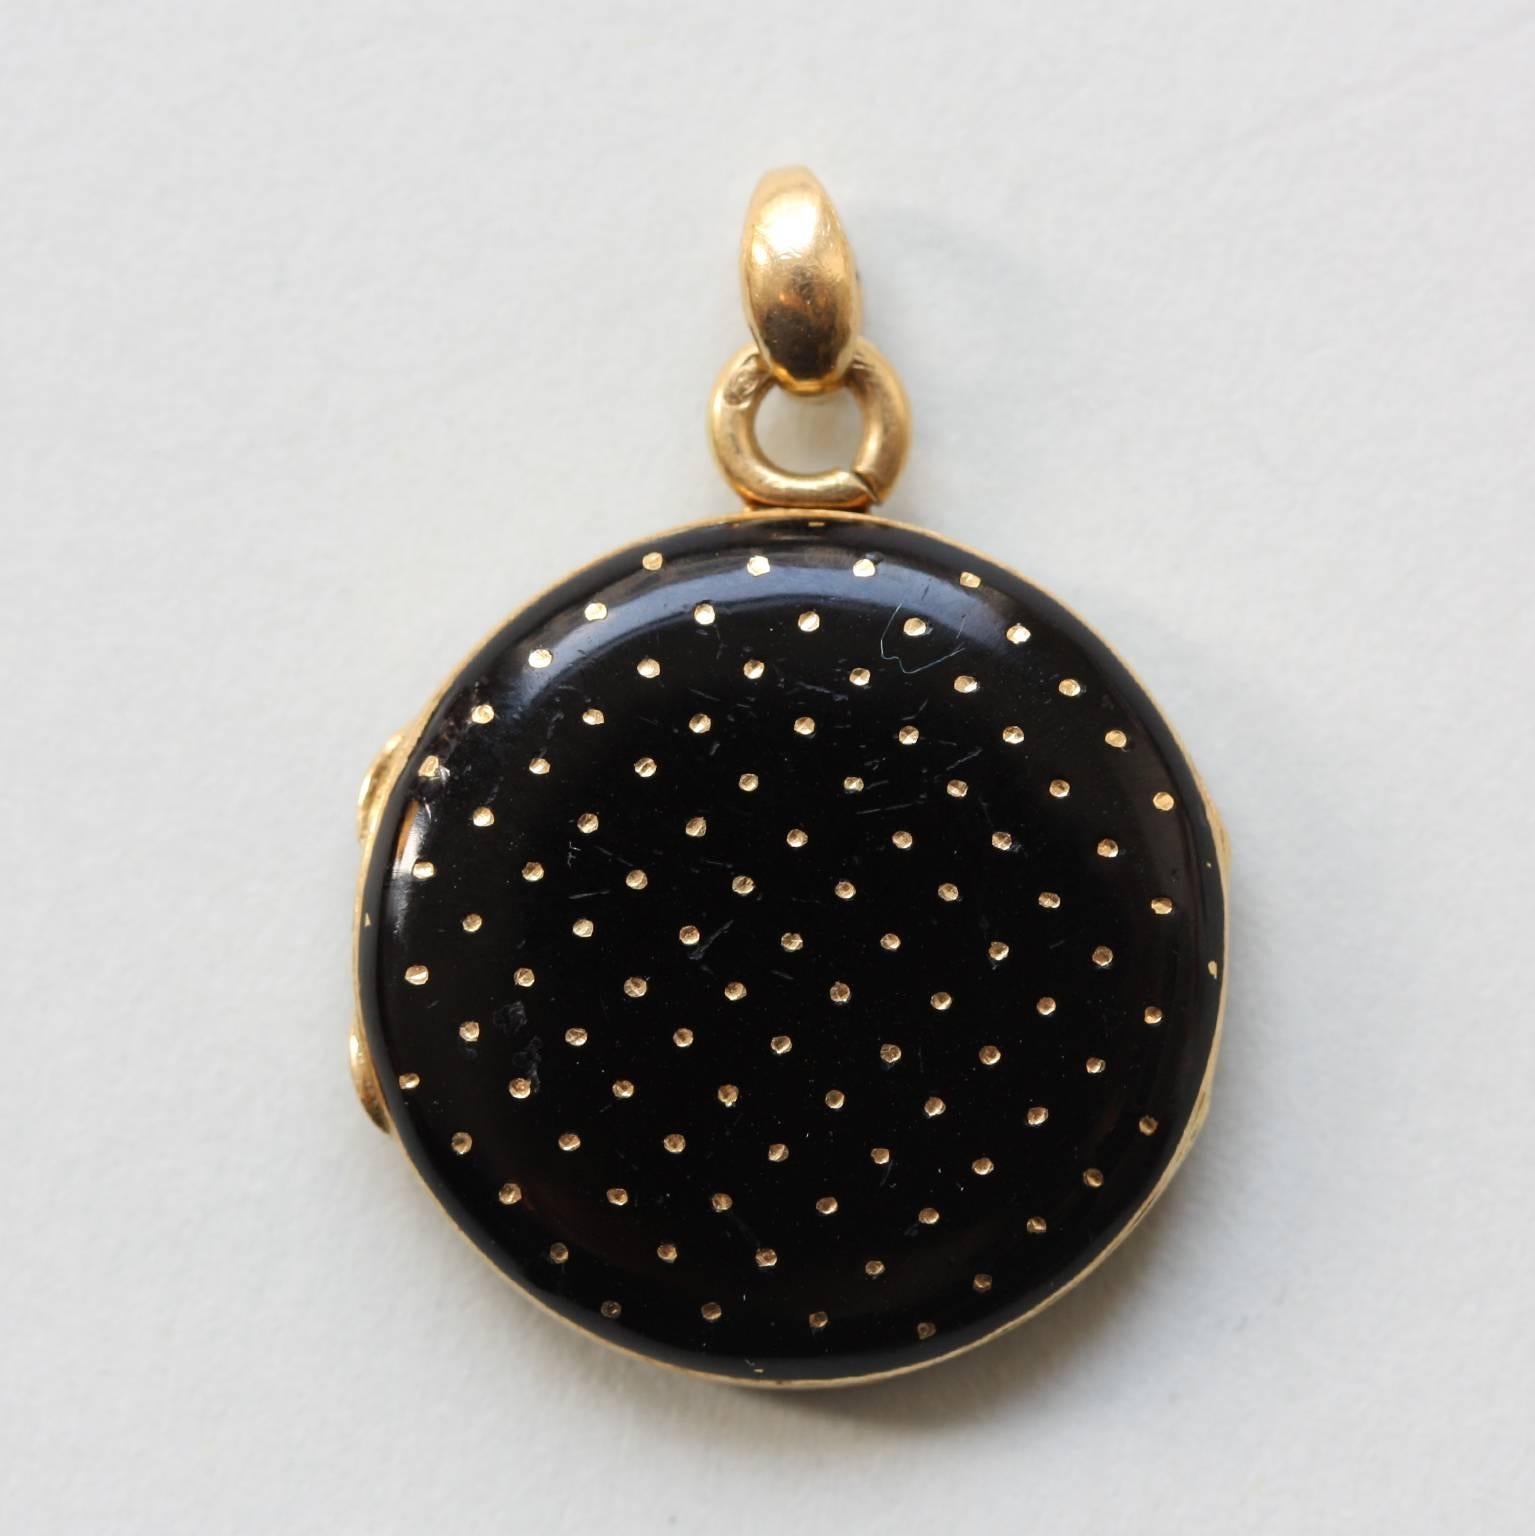 An 18 carat gold round locket with one compartment decorated with black enamel and gold dots on it, 19th century France.

weight: 6.05 grams
dimensions: 2.7 x 1.9 cm
tiny repair to the enamel 